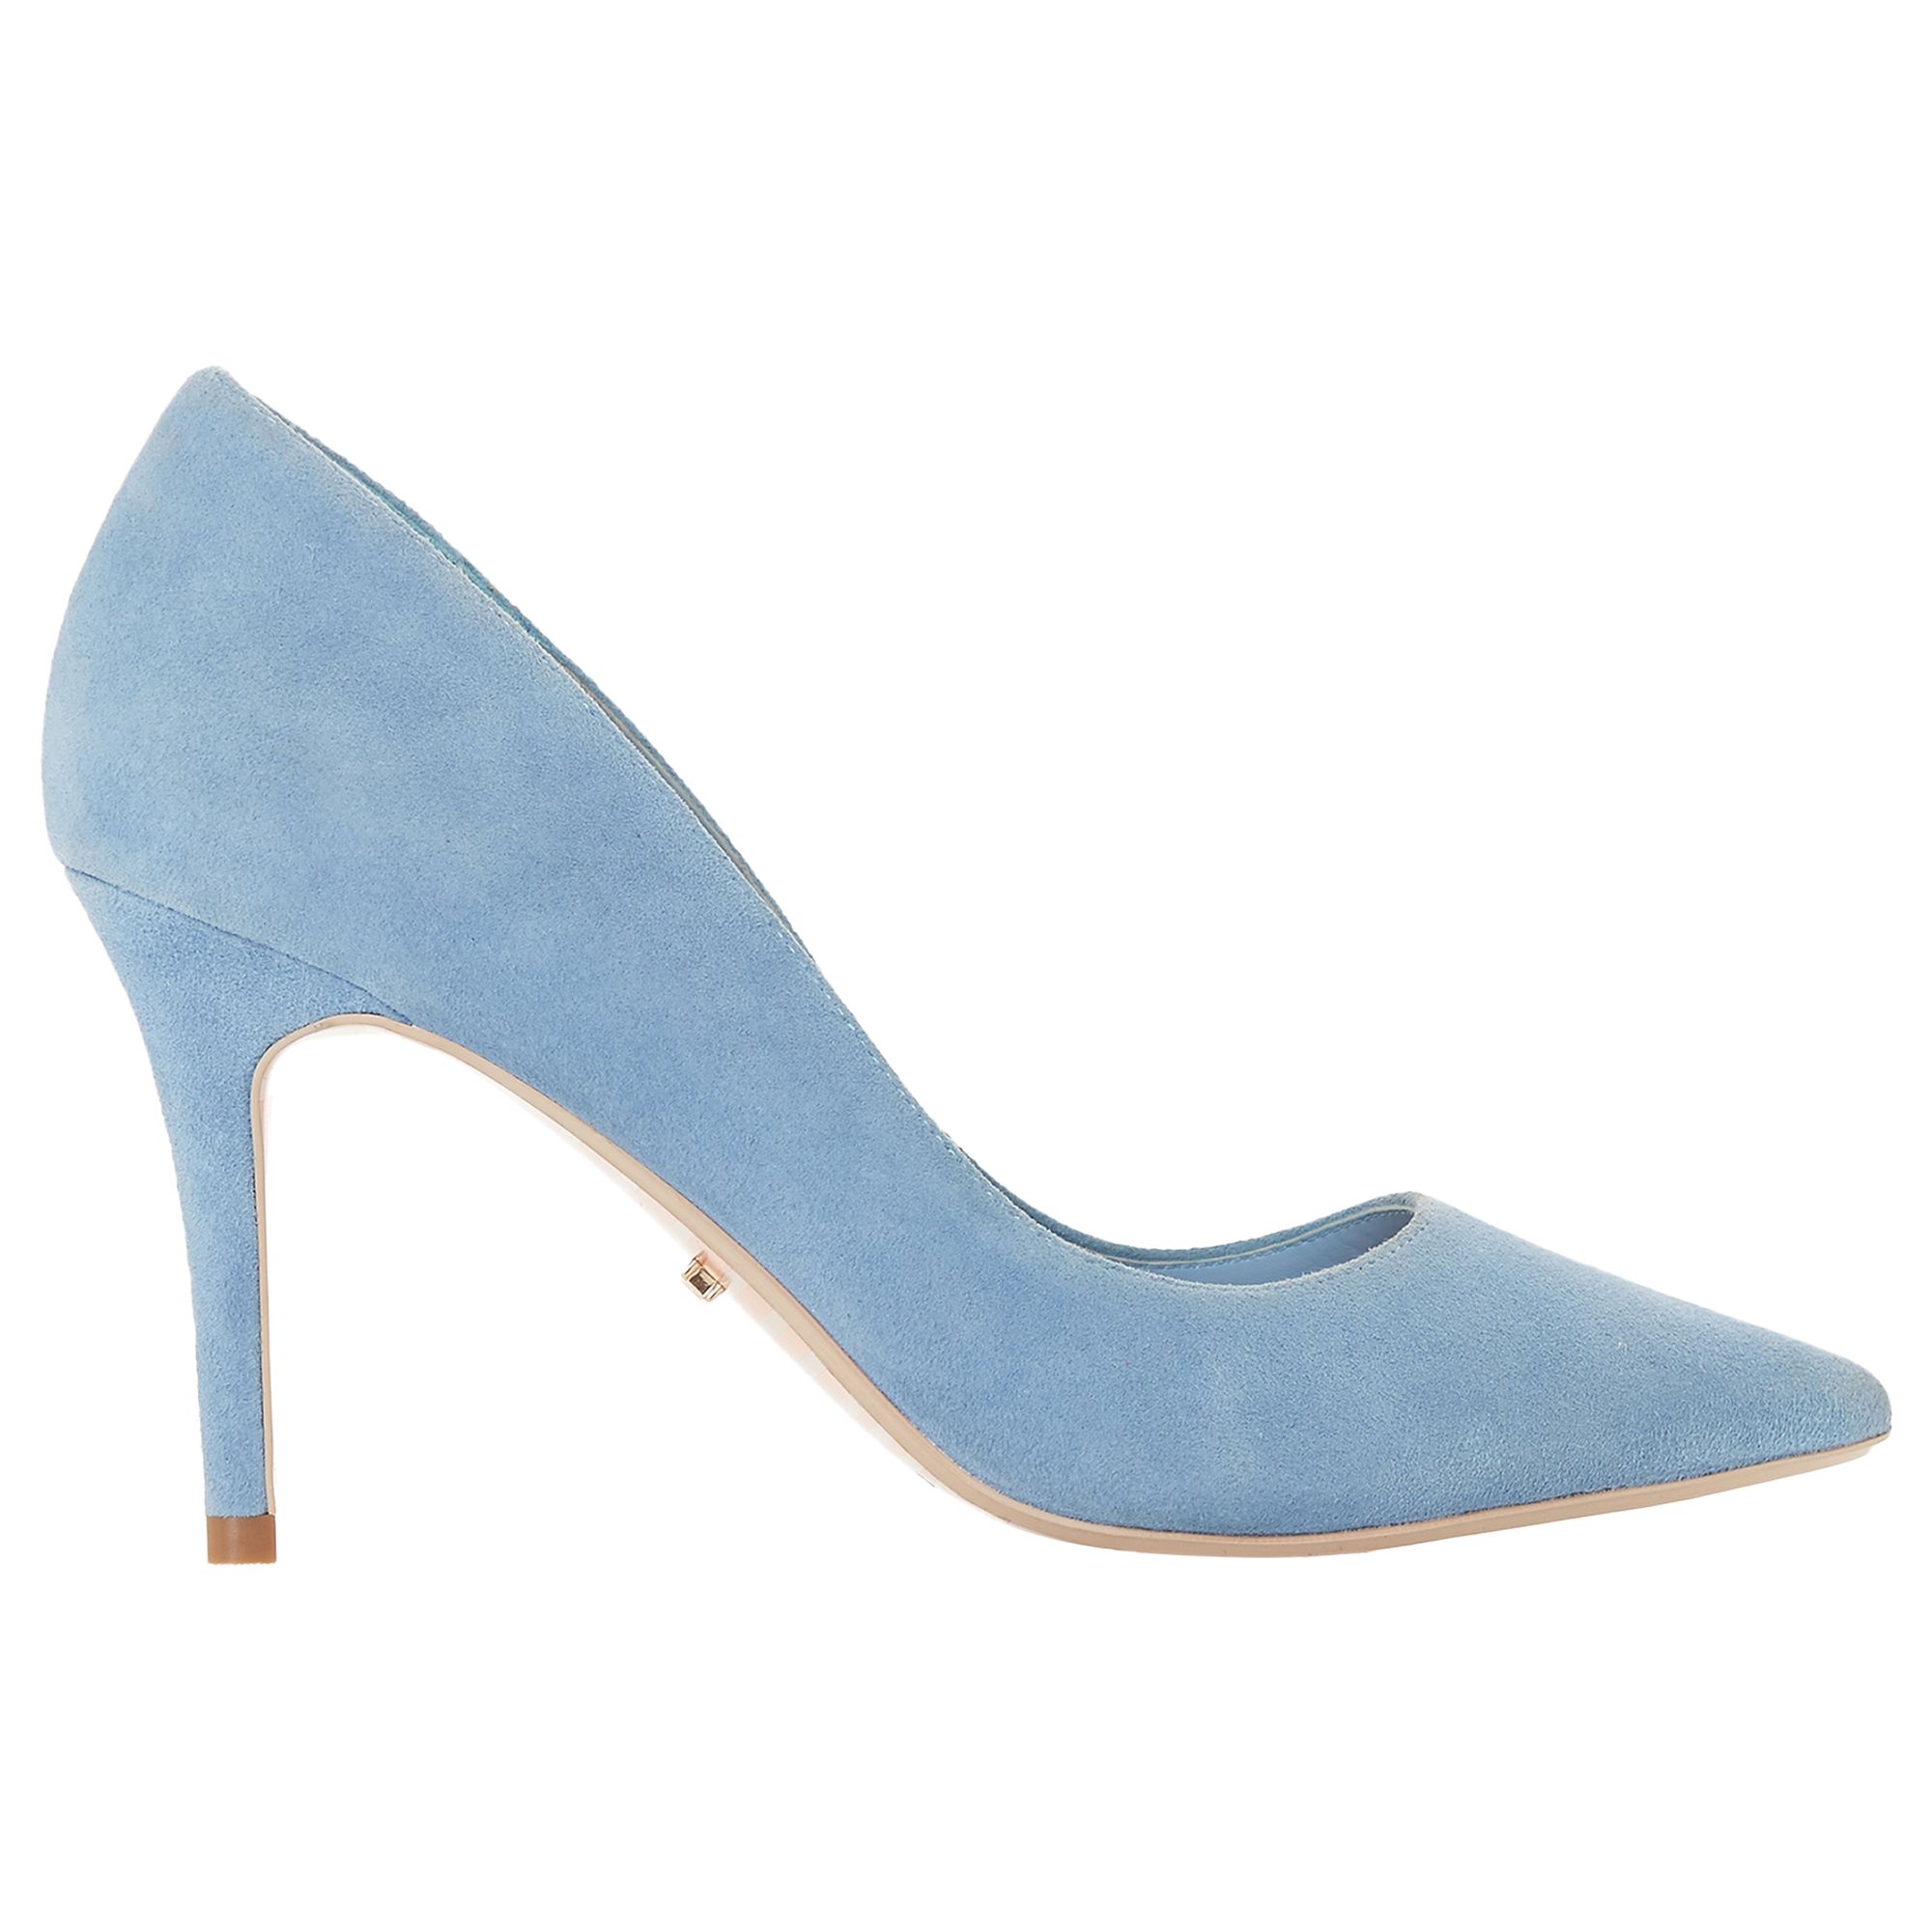 Dune Aurrora Pointed Toe Court Shoes, Blue Suede, 5